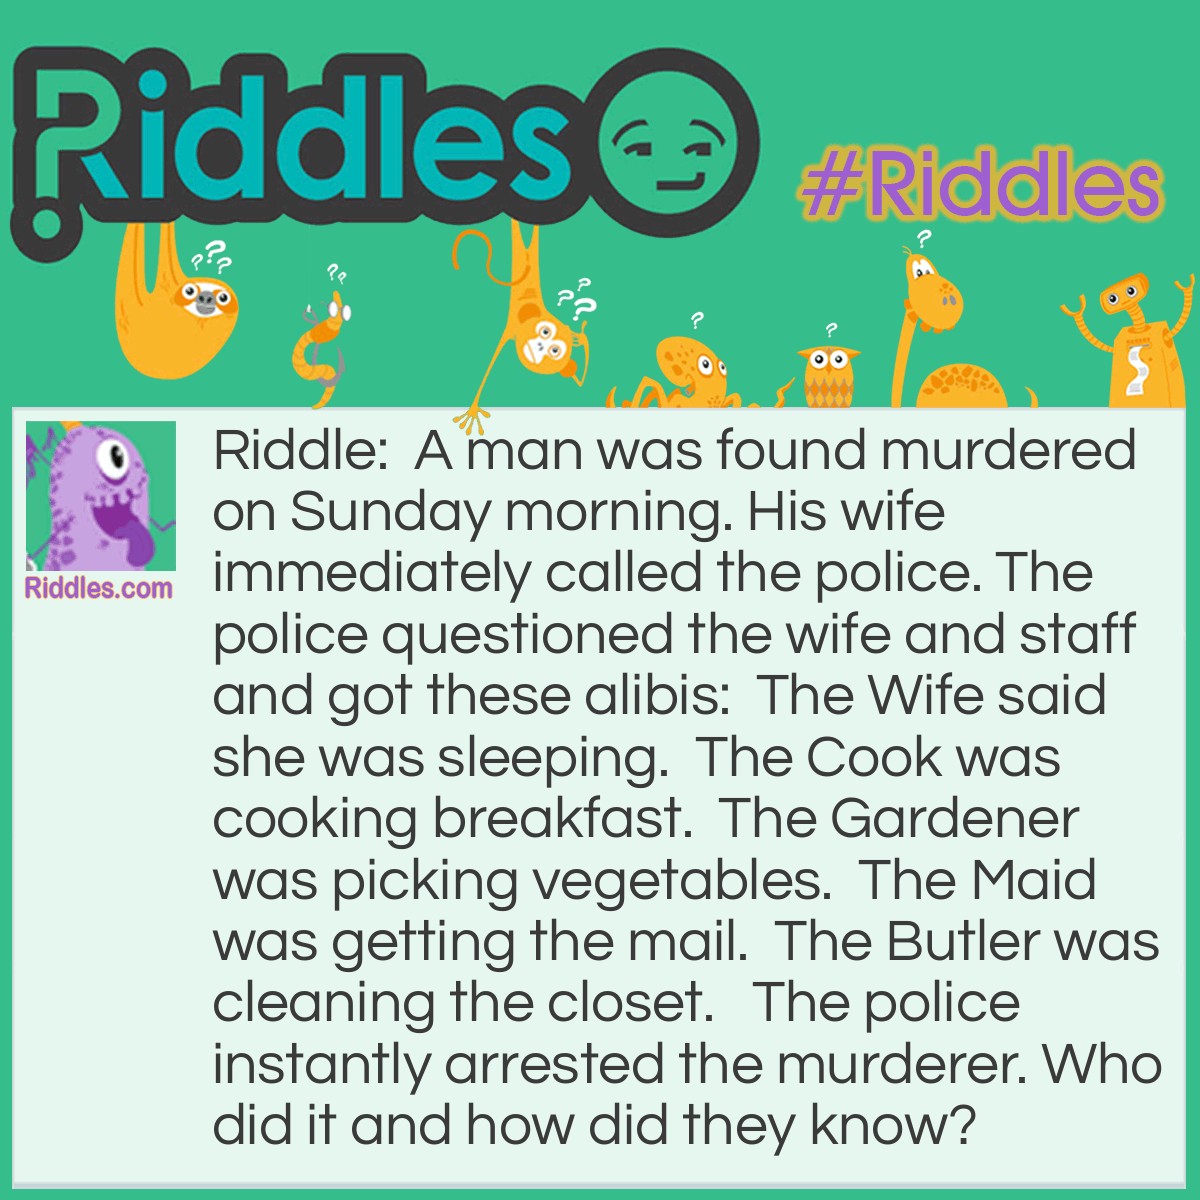 Riddle: A man was found murdered on Sunday morning. His wife immediately called the police. The police questioned the wife and staff and got these alibis:  The Wife said she was sleeping.  The Cook was cooking breakfast.  The Gardener was picking vegetables.  The Maid was getting the mail.  The Butler was cleaning the closet.   The police instantly arrested the murderer. Who did it and how did they know? Answer: It was the Maid. She said she was getting the mail. There is no mail on Sunday! (next day air and email doesn't count)